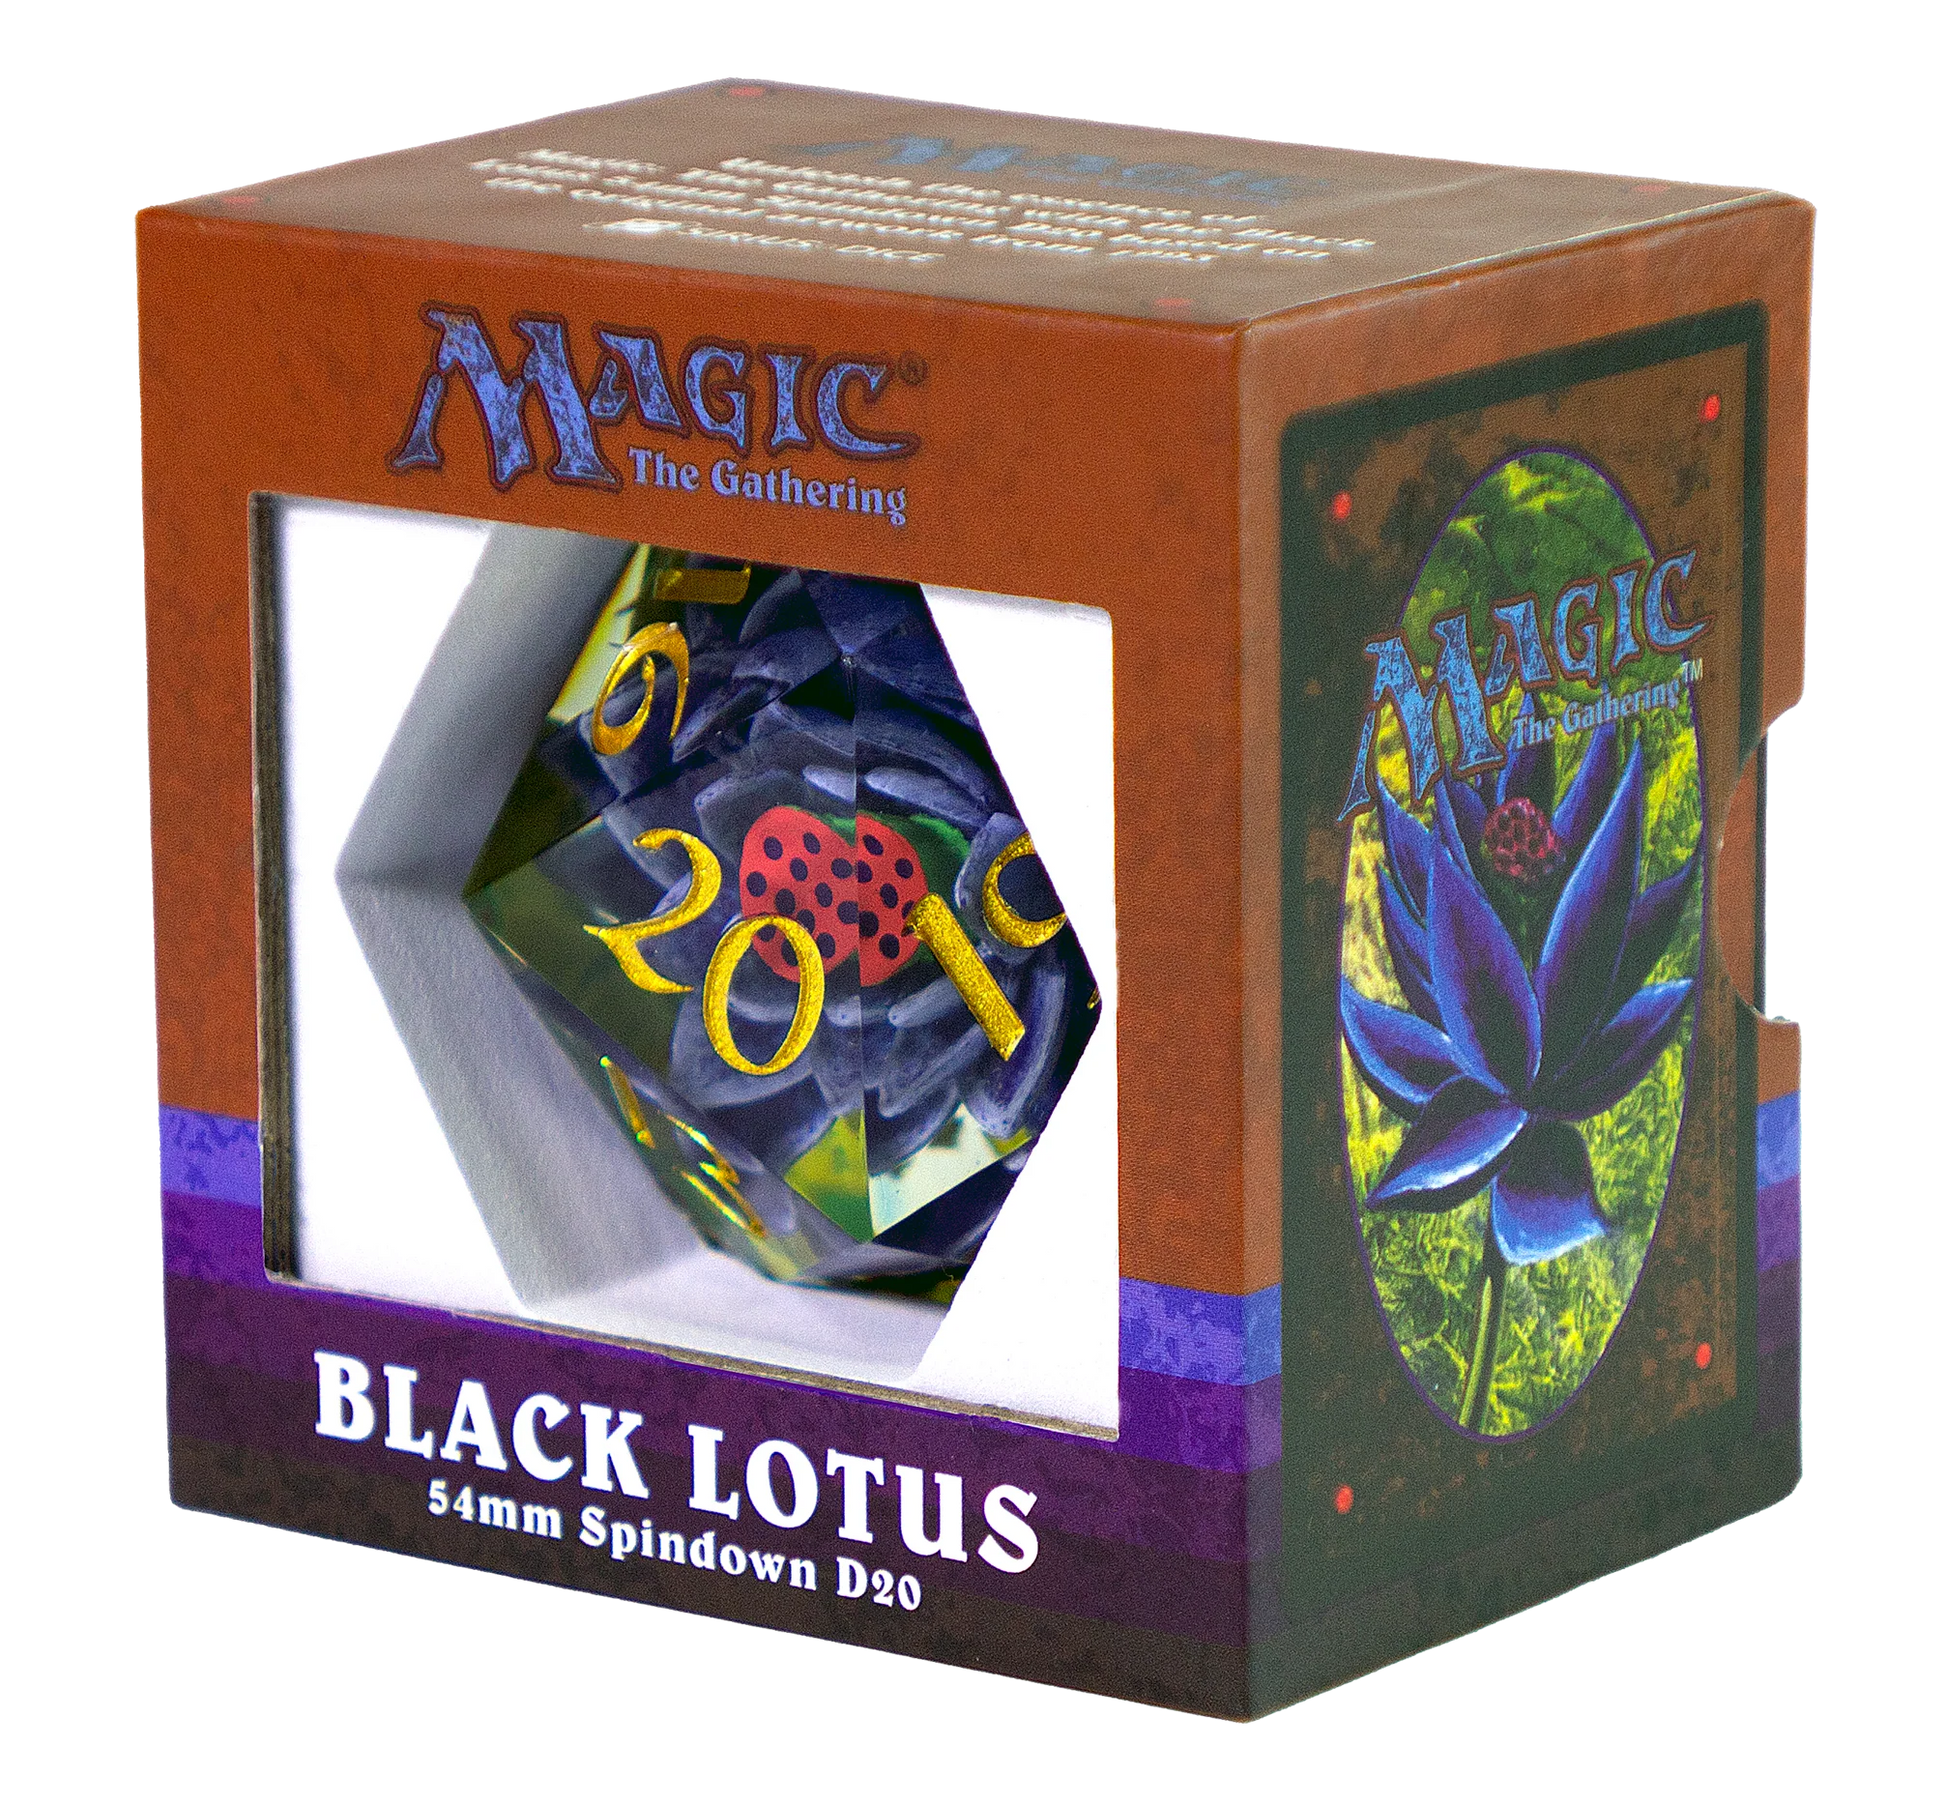 Magic The Gathering Limited Edition Black Lotus Oversized Spindown D20 - 54mm In Box